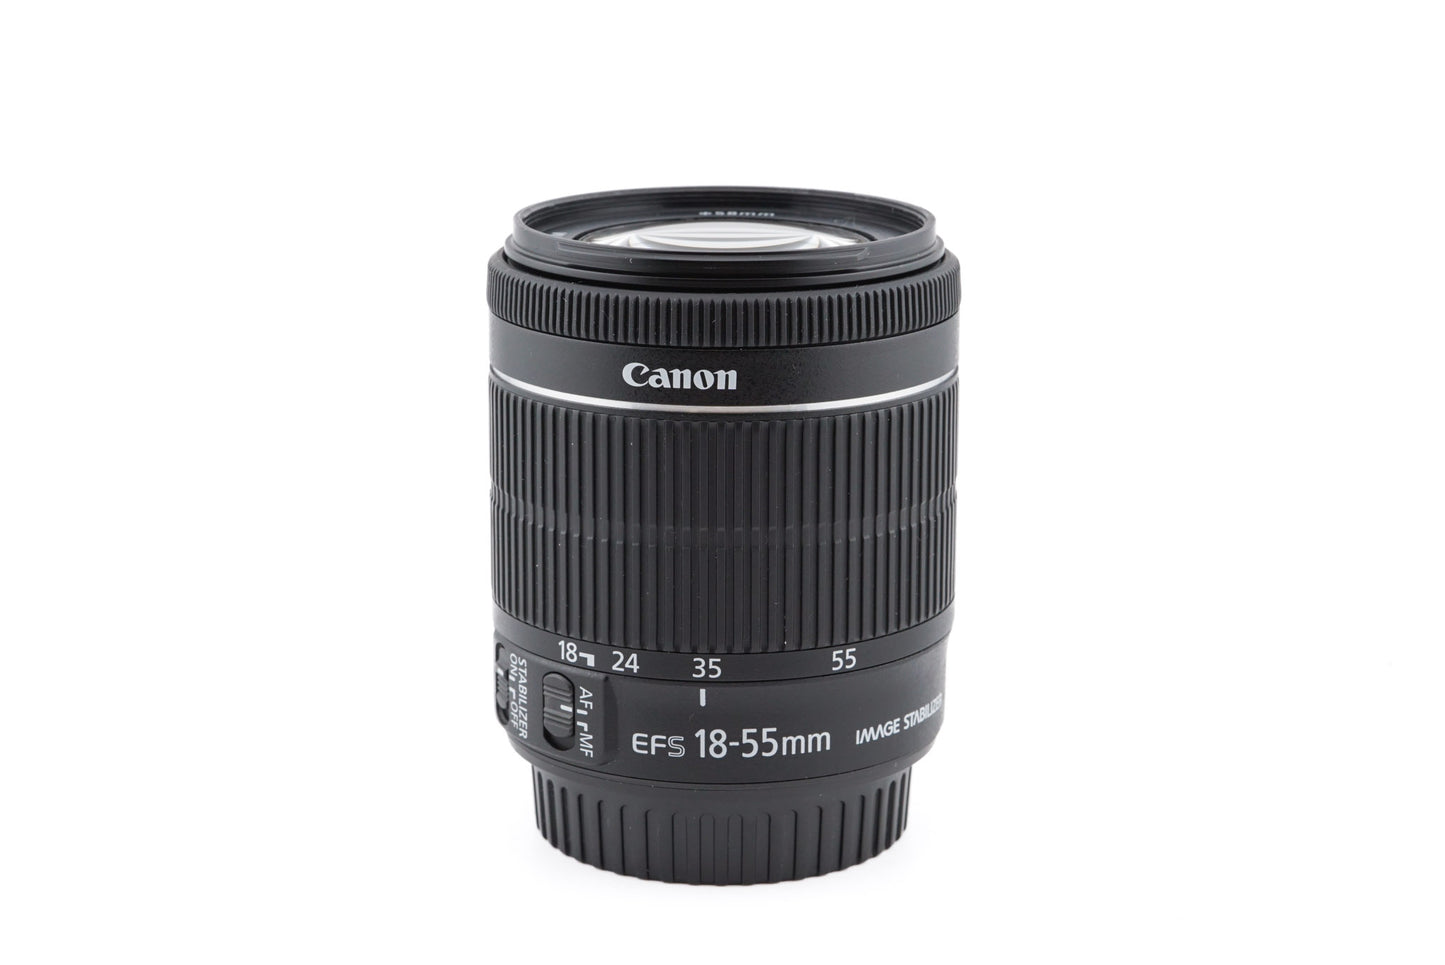 Canon 18-55mm f3.5-5.6 IS STM - Lens